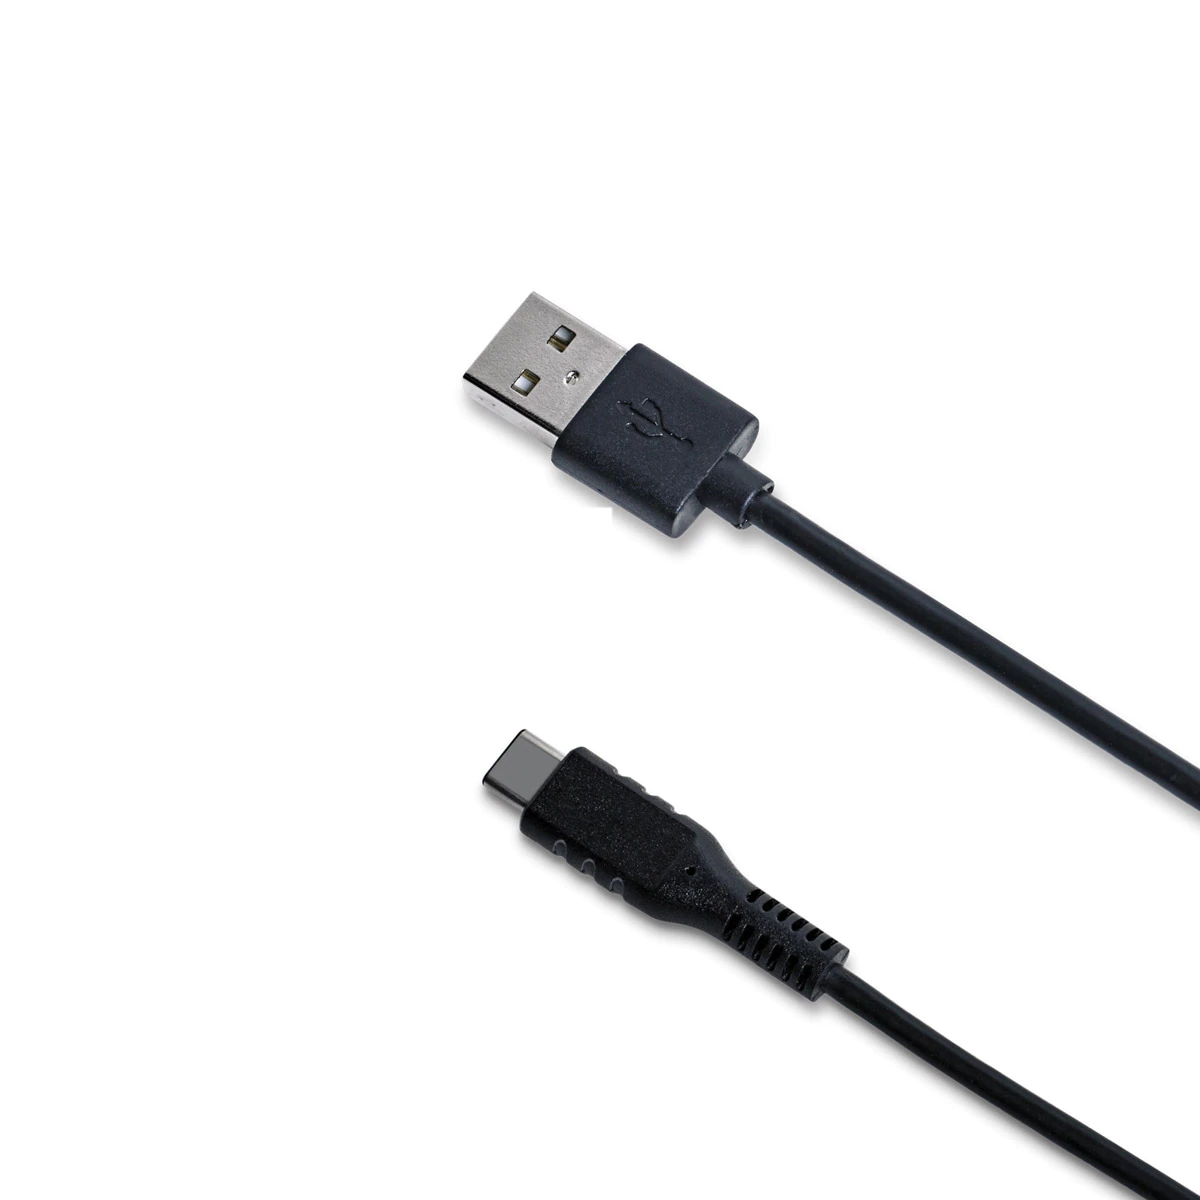 Cable Celly USB a USB Tipo C 3.1 negro